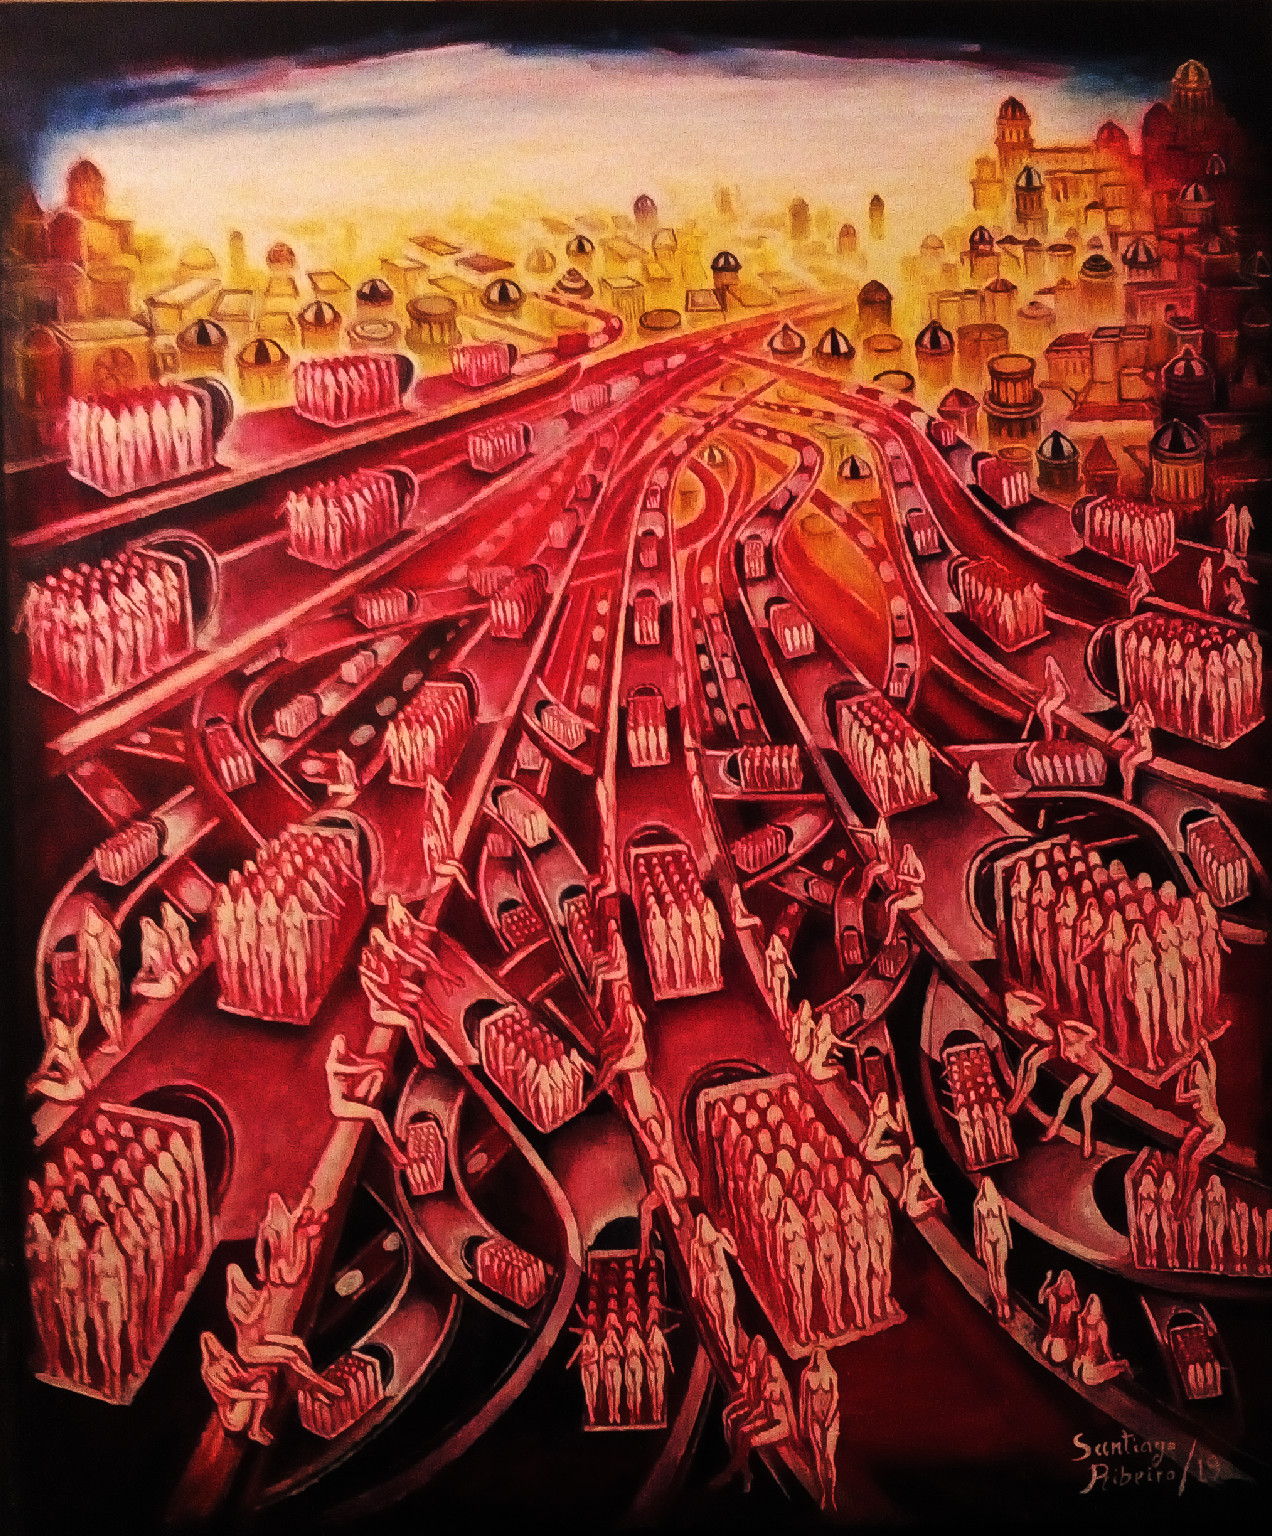 The painting "Metropolis 5000" will be one of the paintings present. This work is currently in the United States where it was exhibited in New York at the Artifact Gallery.